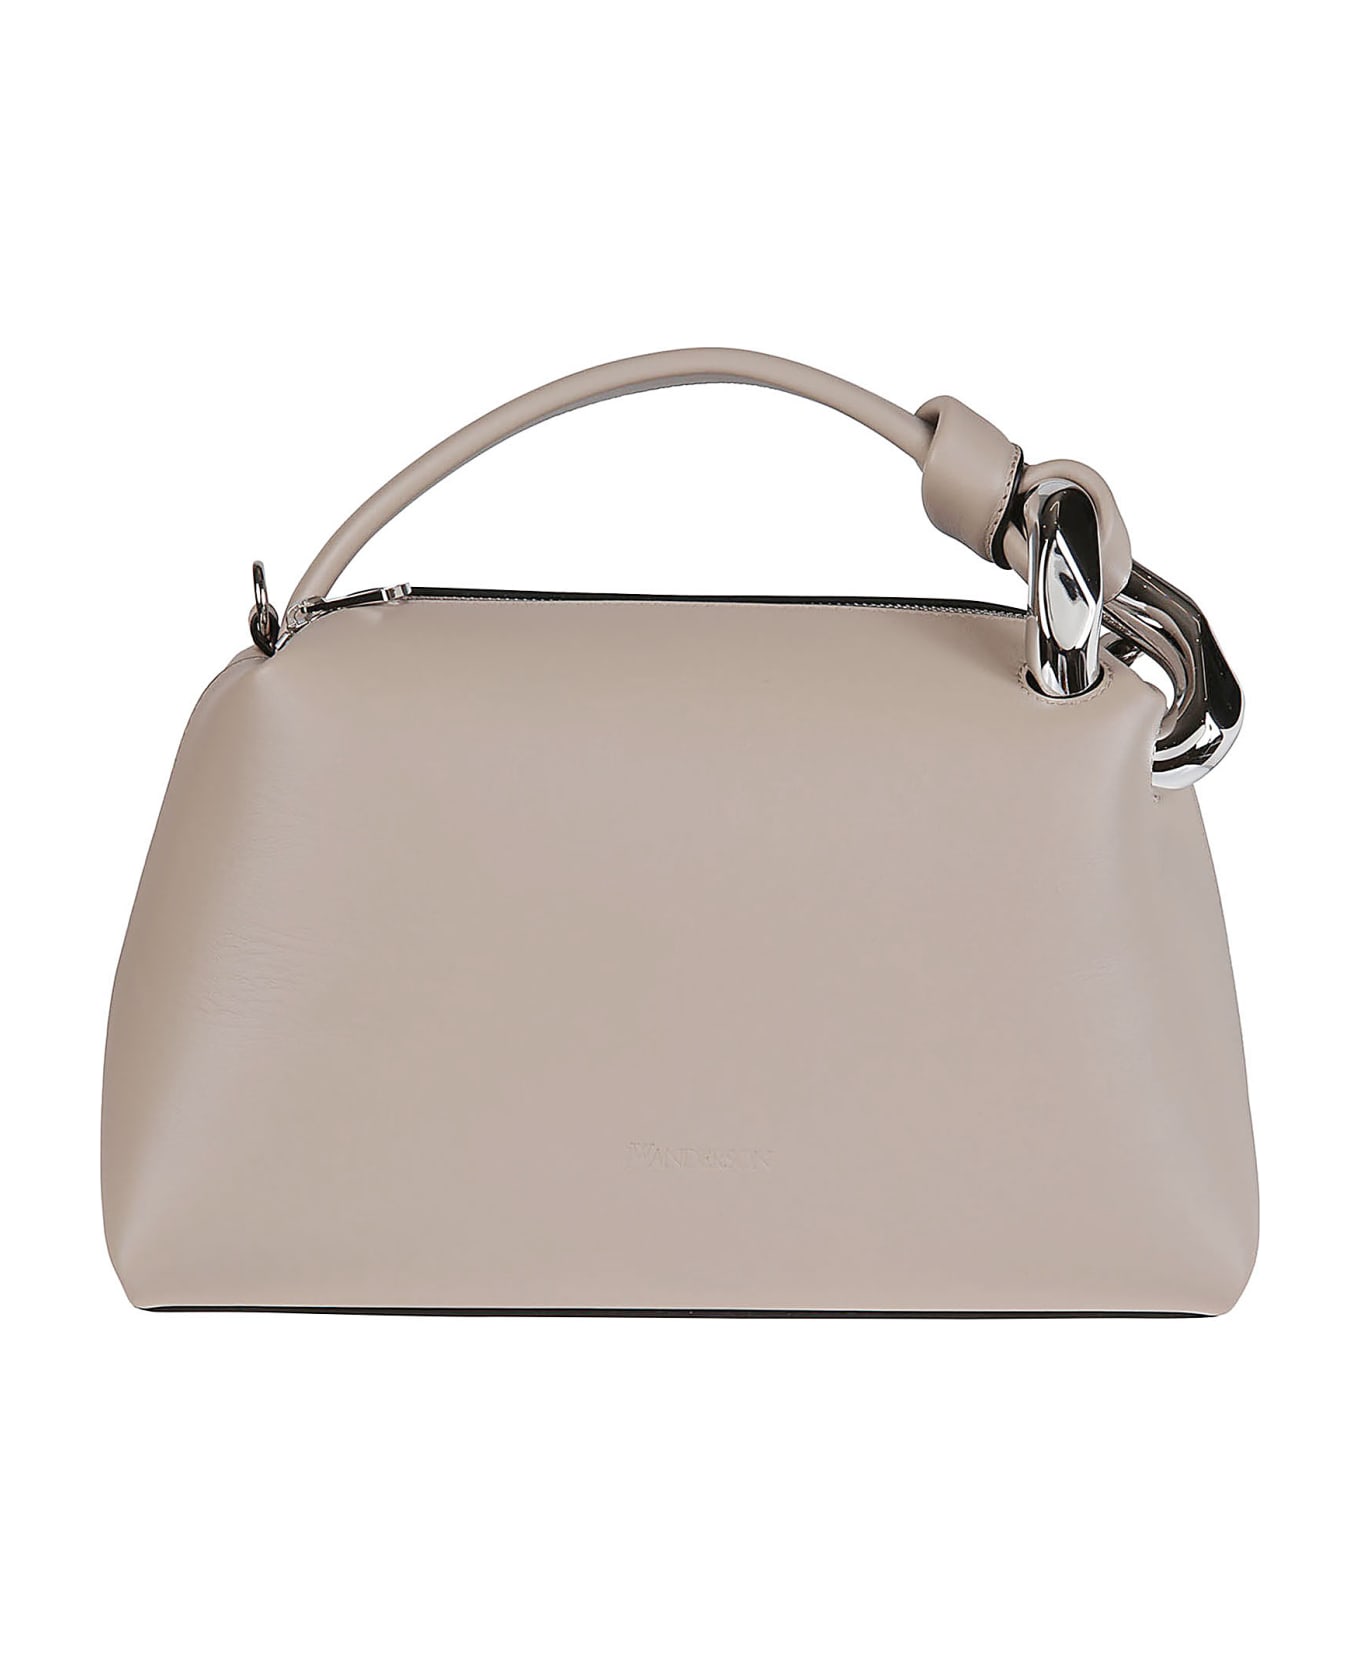 J.W. Anderson The Corner Bag - Taupe トートバッグ